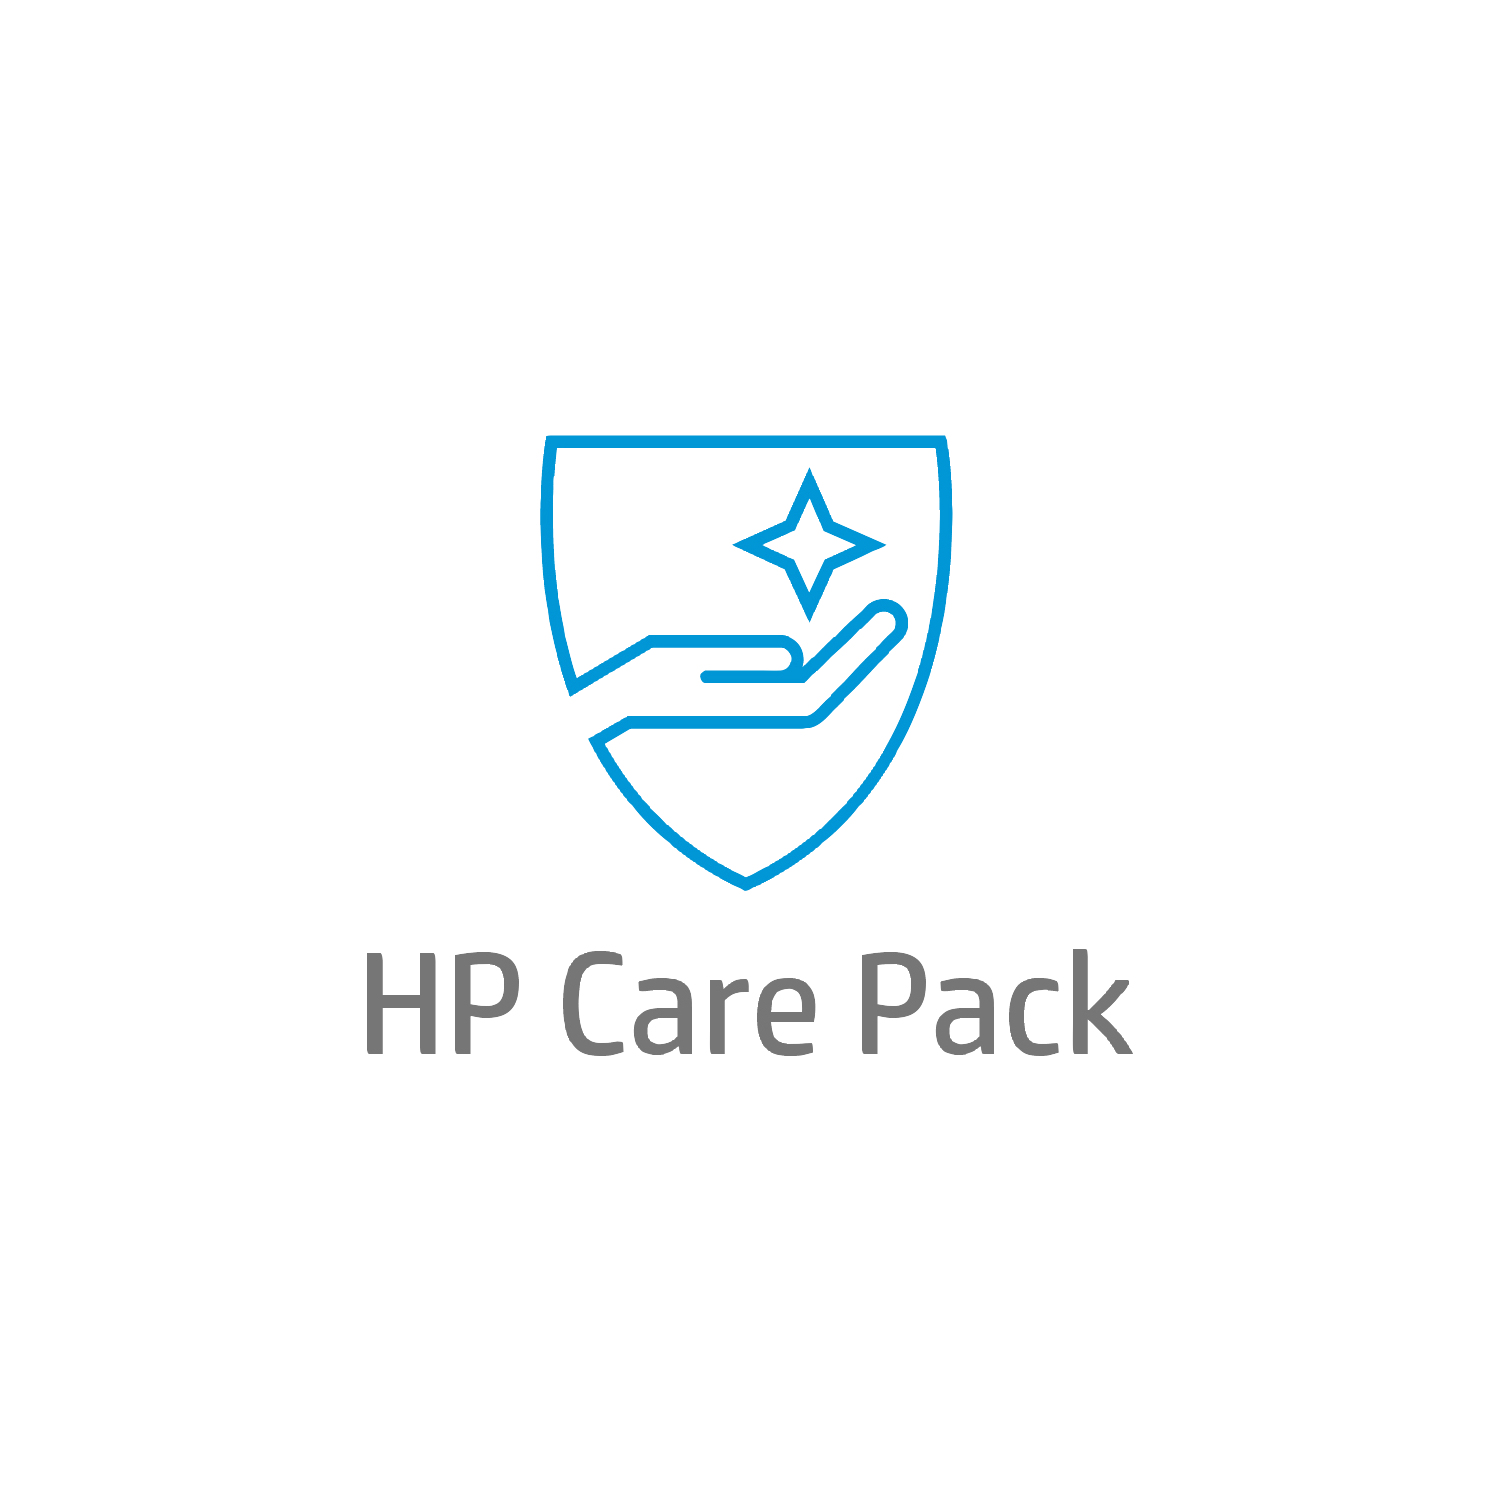 HP 4y 9x5 Workplace 2000-4999 License Support REQUIRED for ea. software lic. Purchased